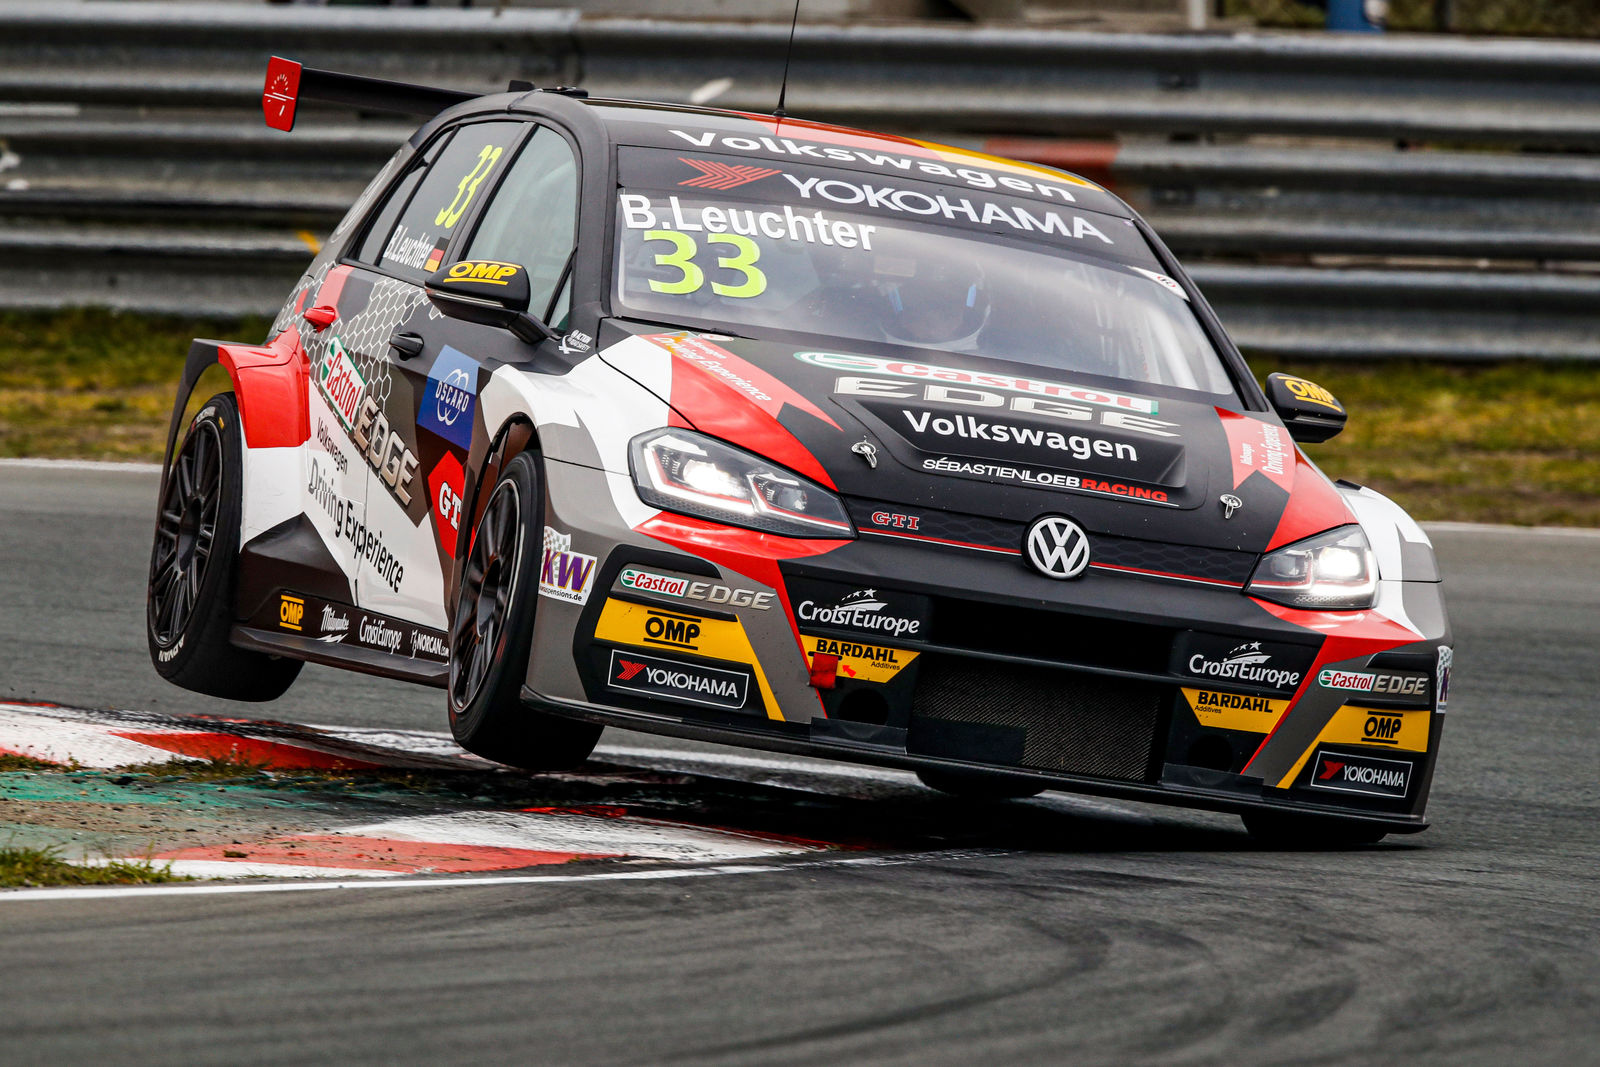 WTCR home race for Volkswagen and Benjamin Leuchter on the Nordschleife